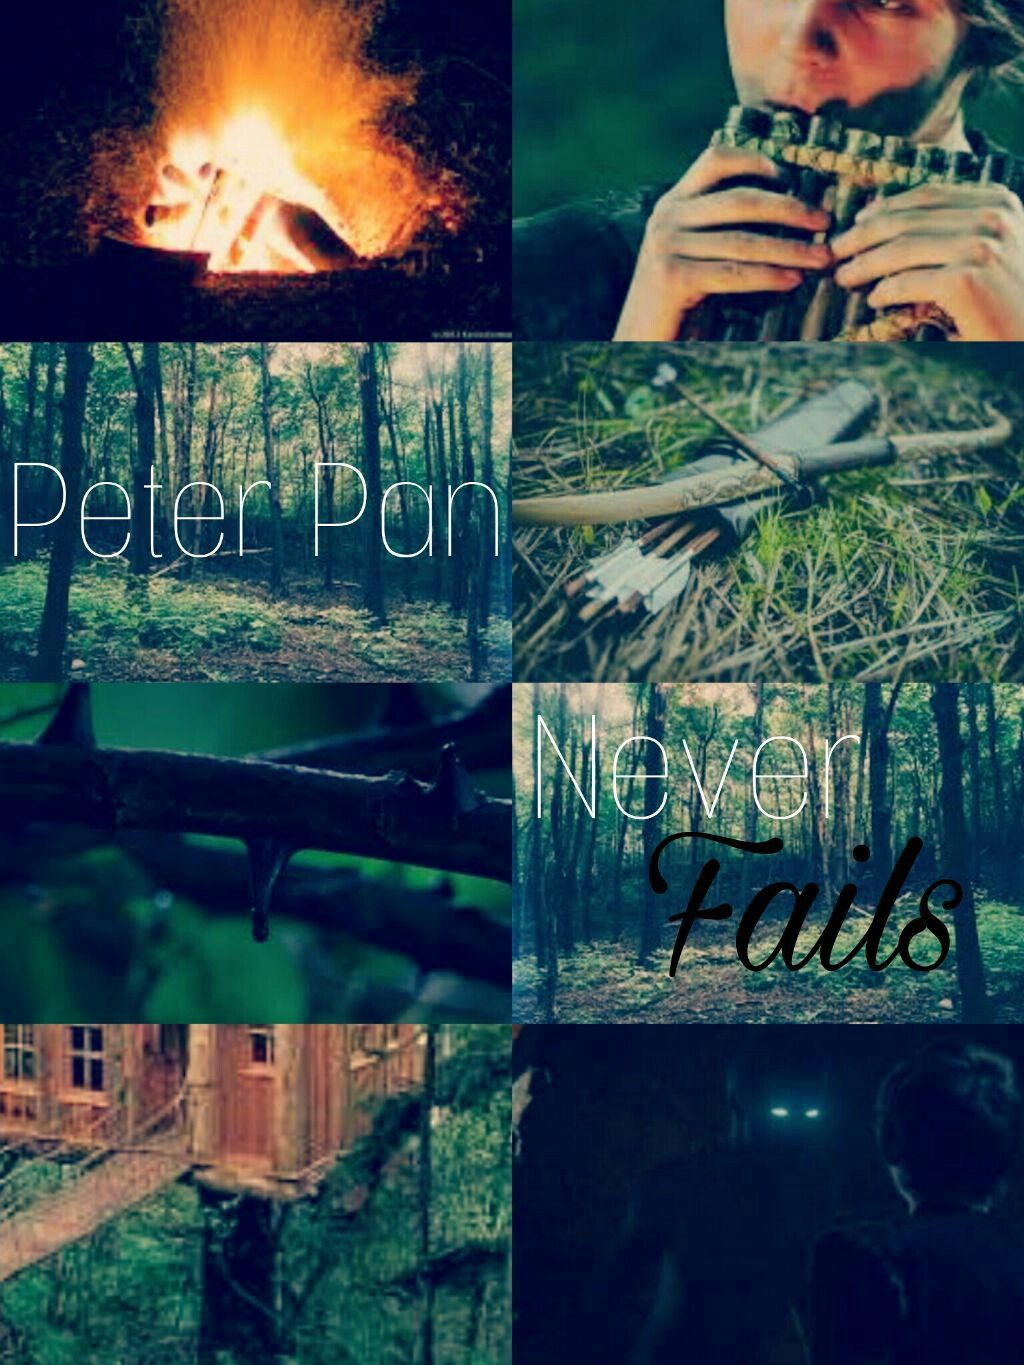 Peter Pan. Pied Piper. Once Upon A Time. Aesthetic. Edit. Peter pan ouat, Peter pan wallpaper, Once upon a time peter pan